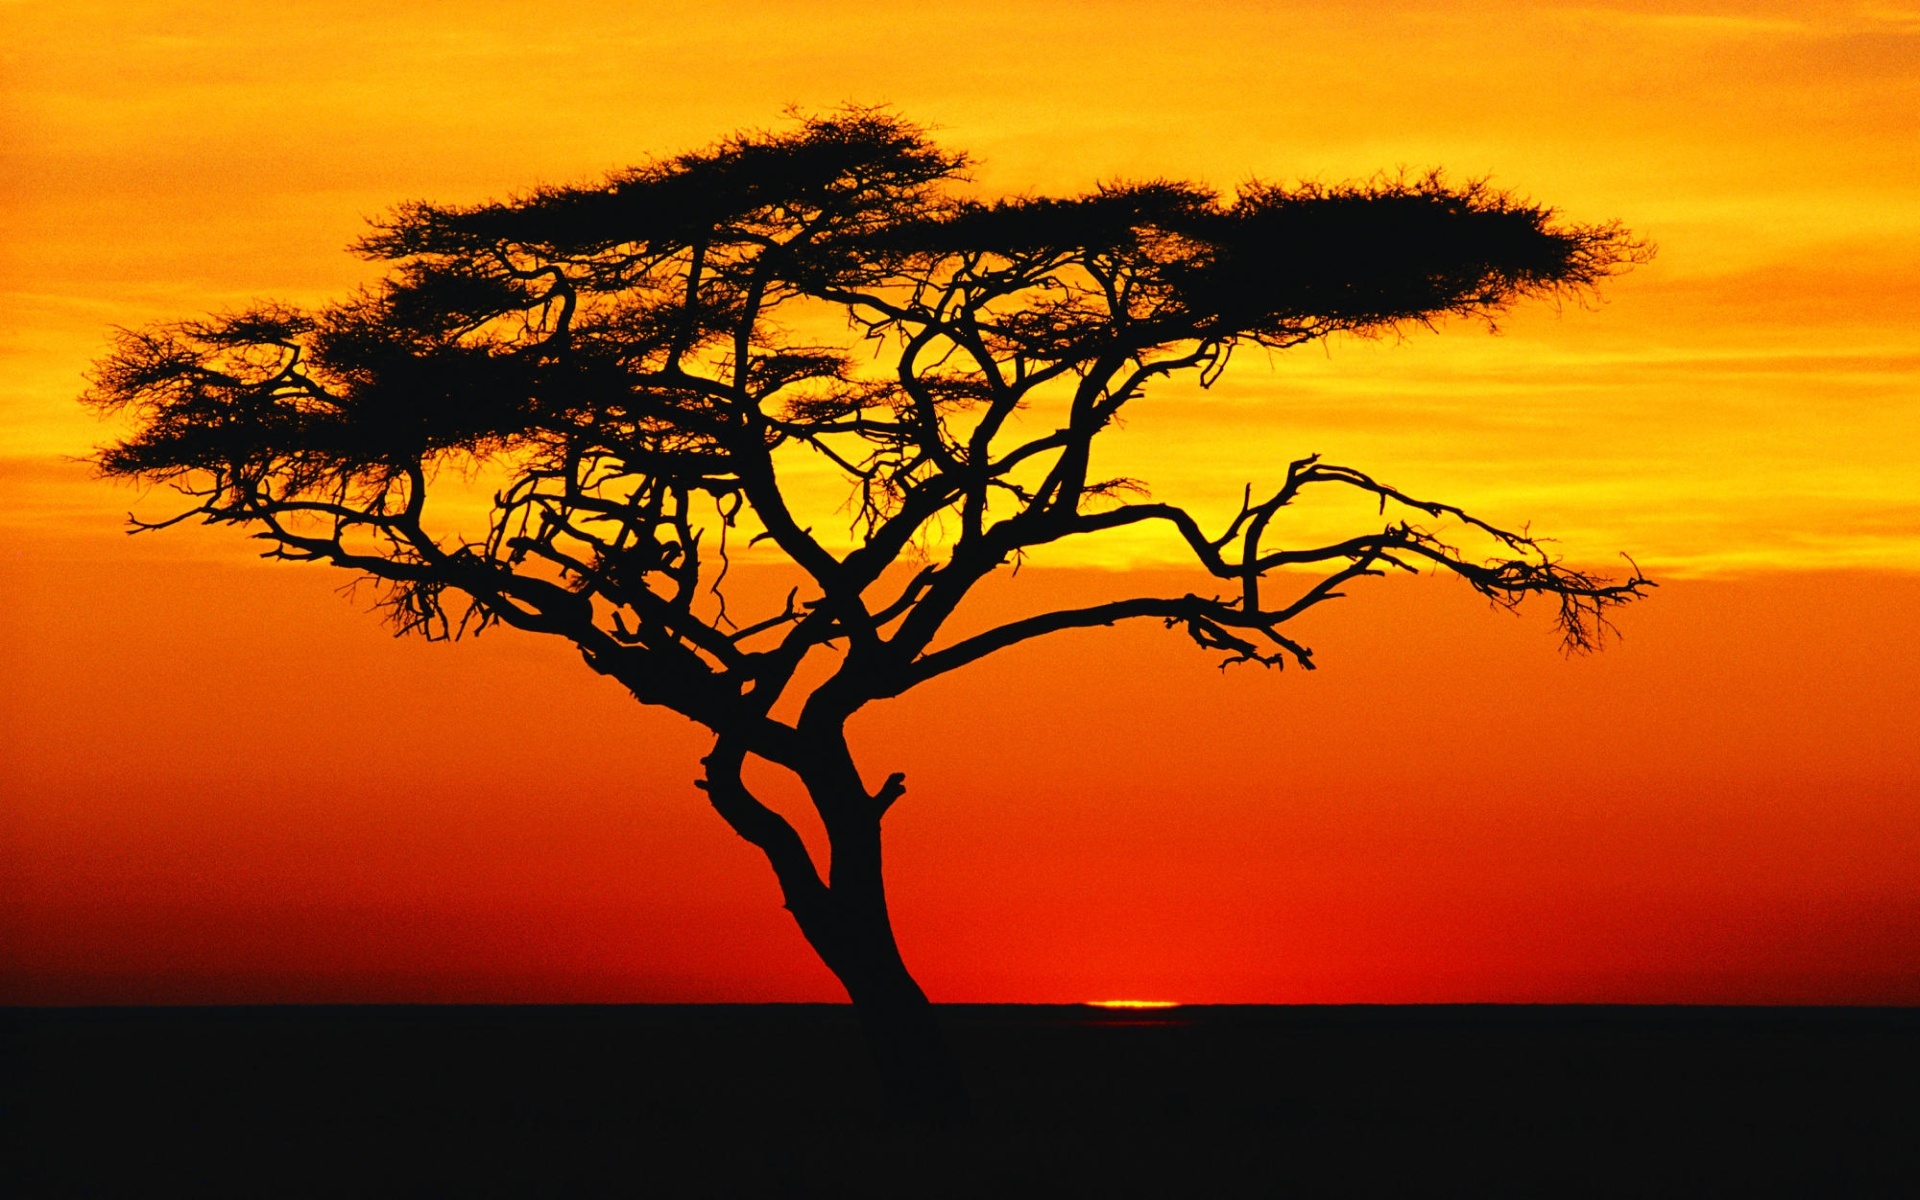 Download Tree Silhouette HD Wallpapers absolutely free for your pc desktop, laptop and mobile devices.